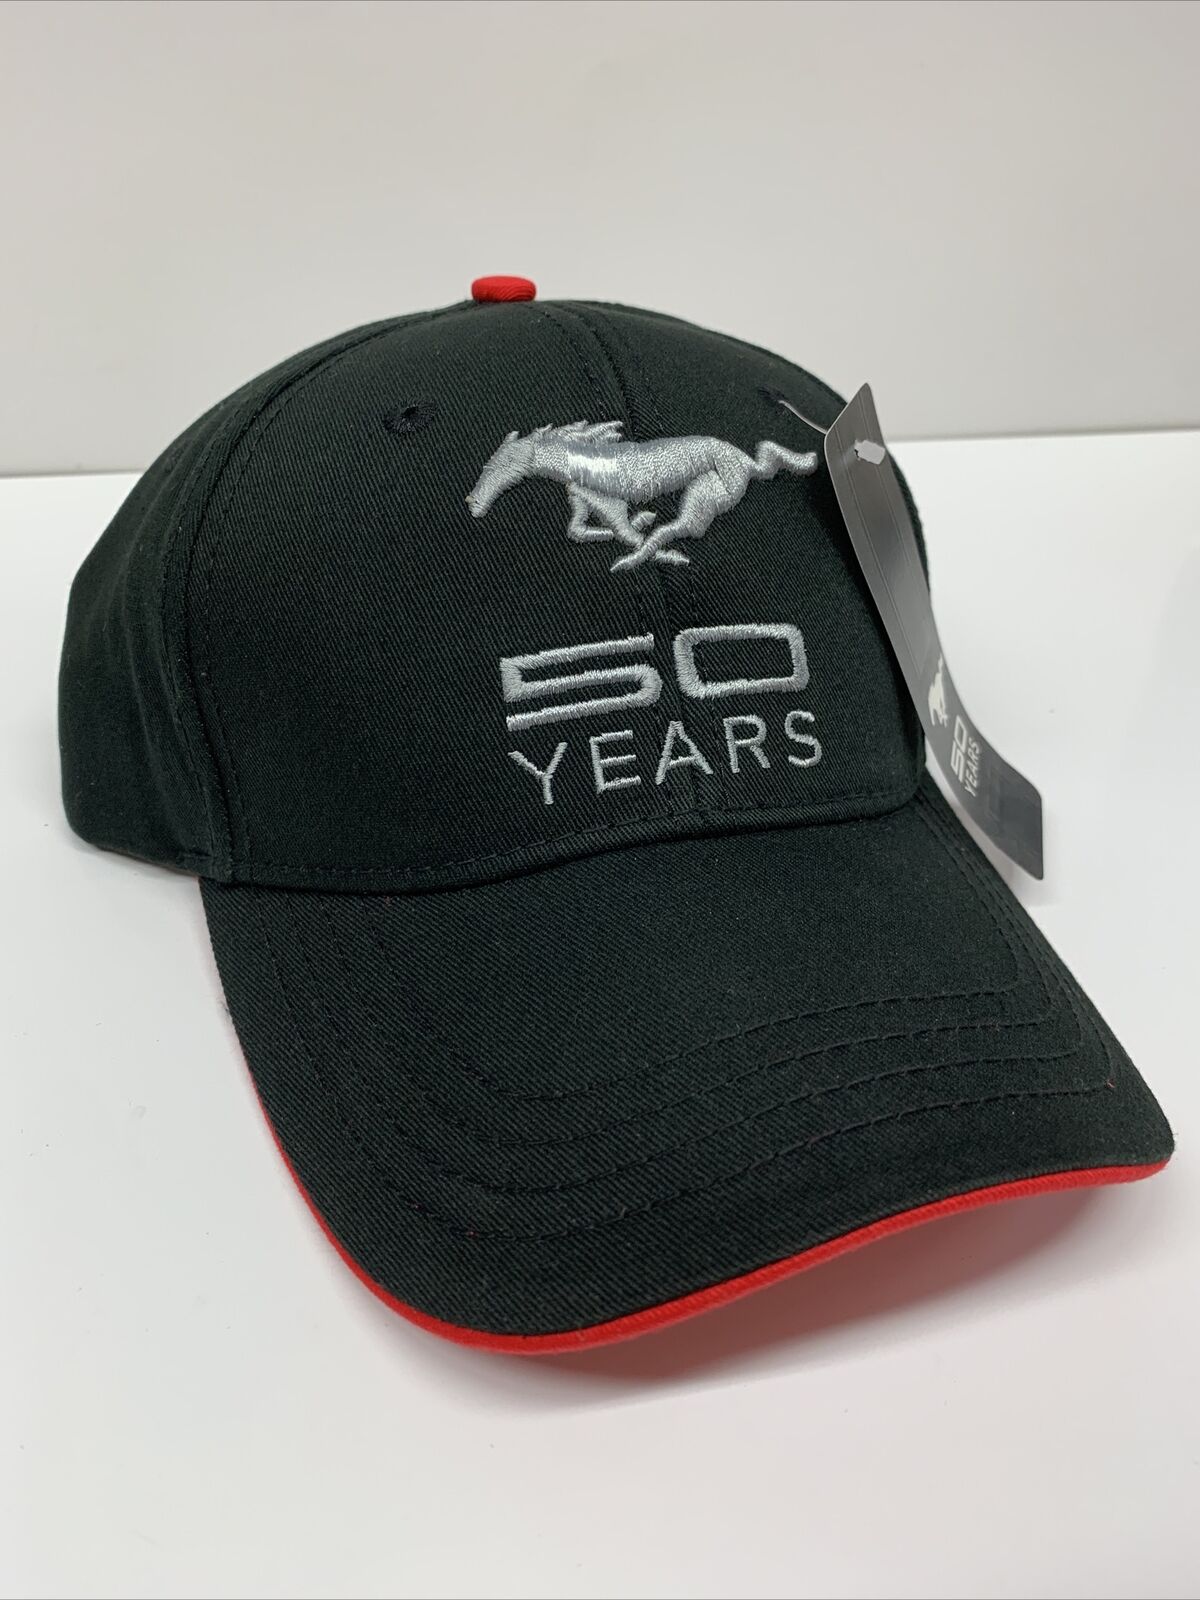 NEW FORD MUSTANG 50 YEARS EMBROIDERED CAP/HAT